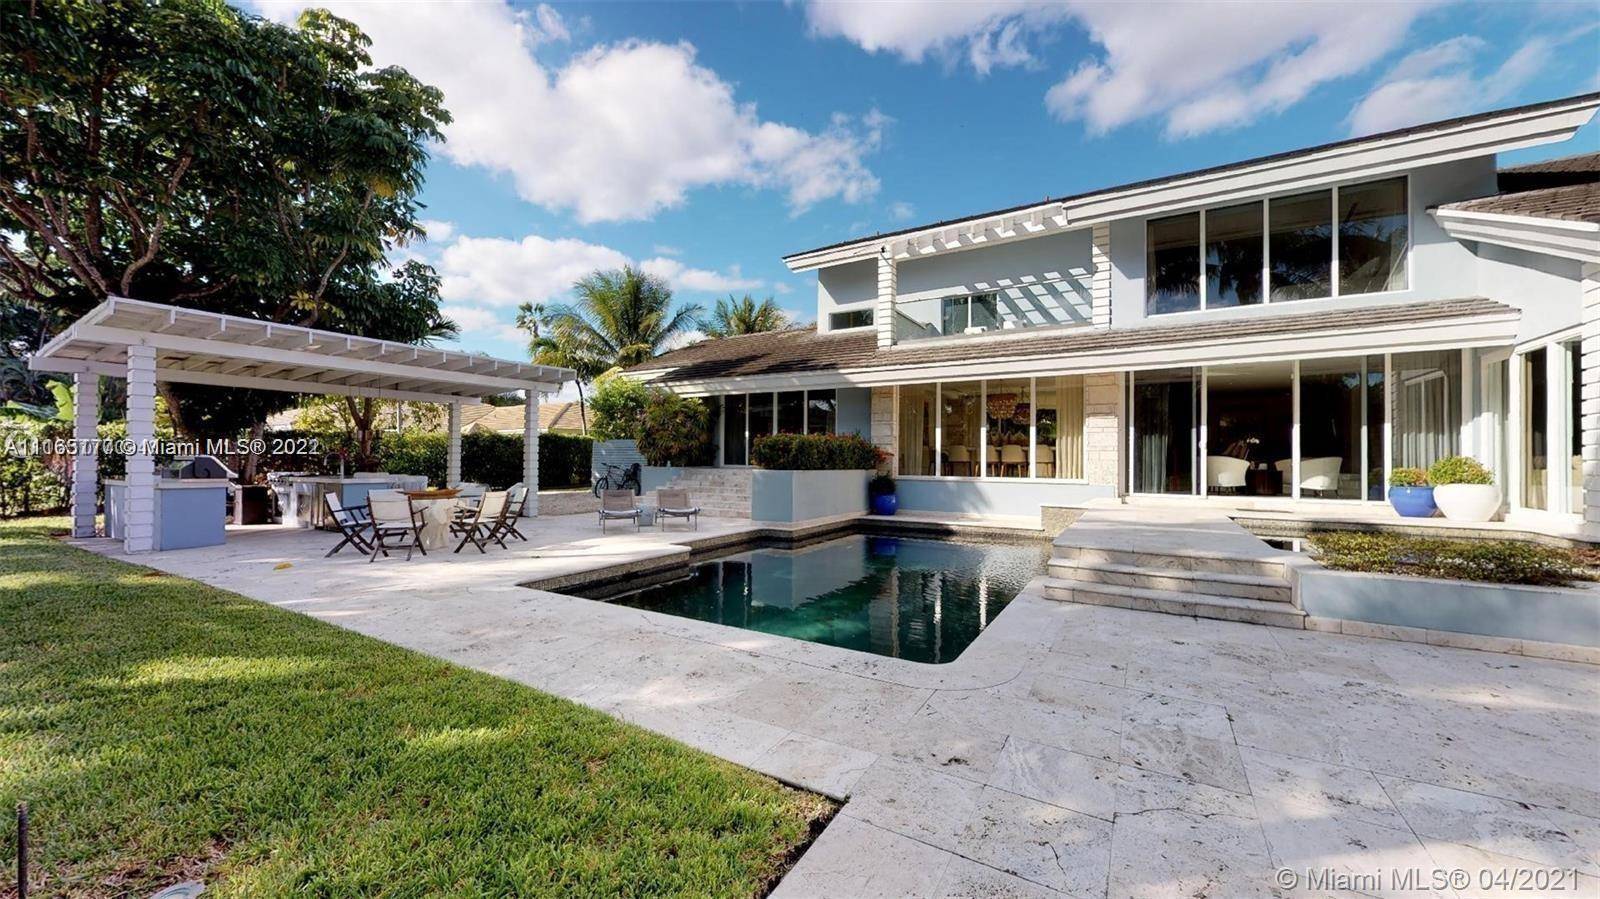 EXQUISITE MODERN masterpiece home perfectly remodeled and decorated by the renowned architect of 1 Hotel South Beach and Hyde Bach.